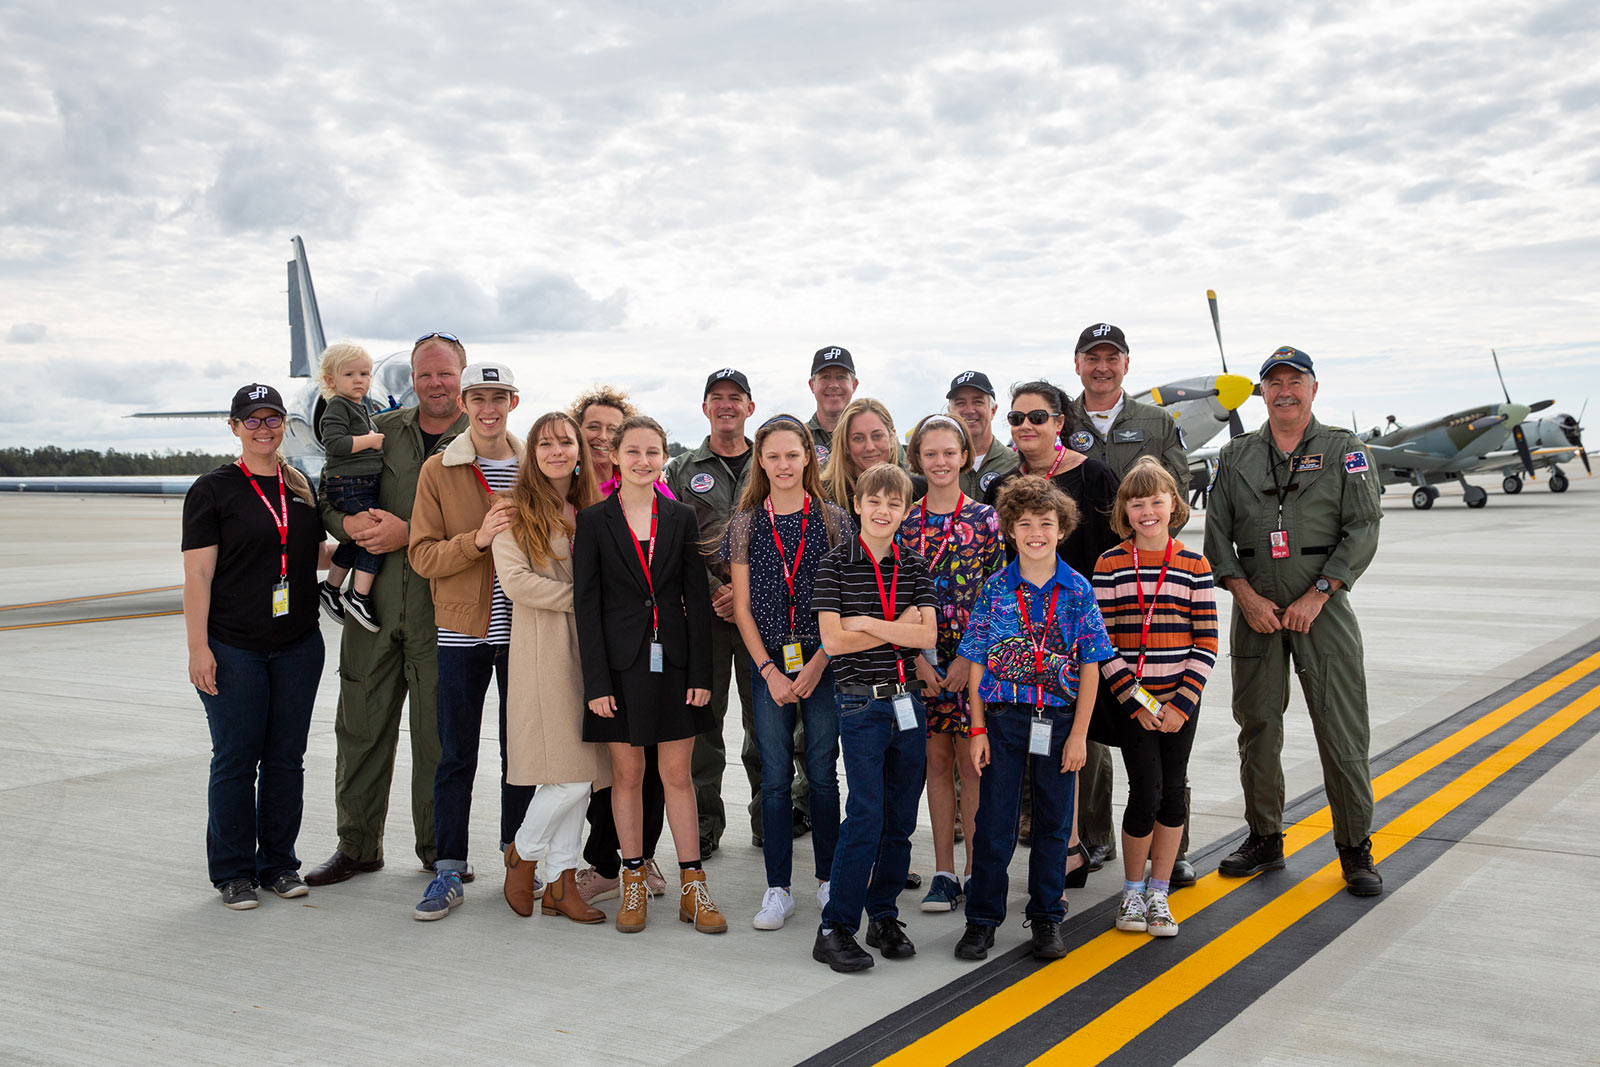 The team from Fighter Pilot Adventure Flights and their families